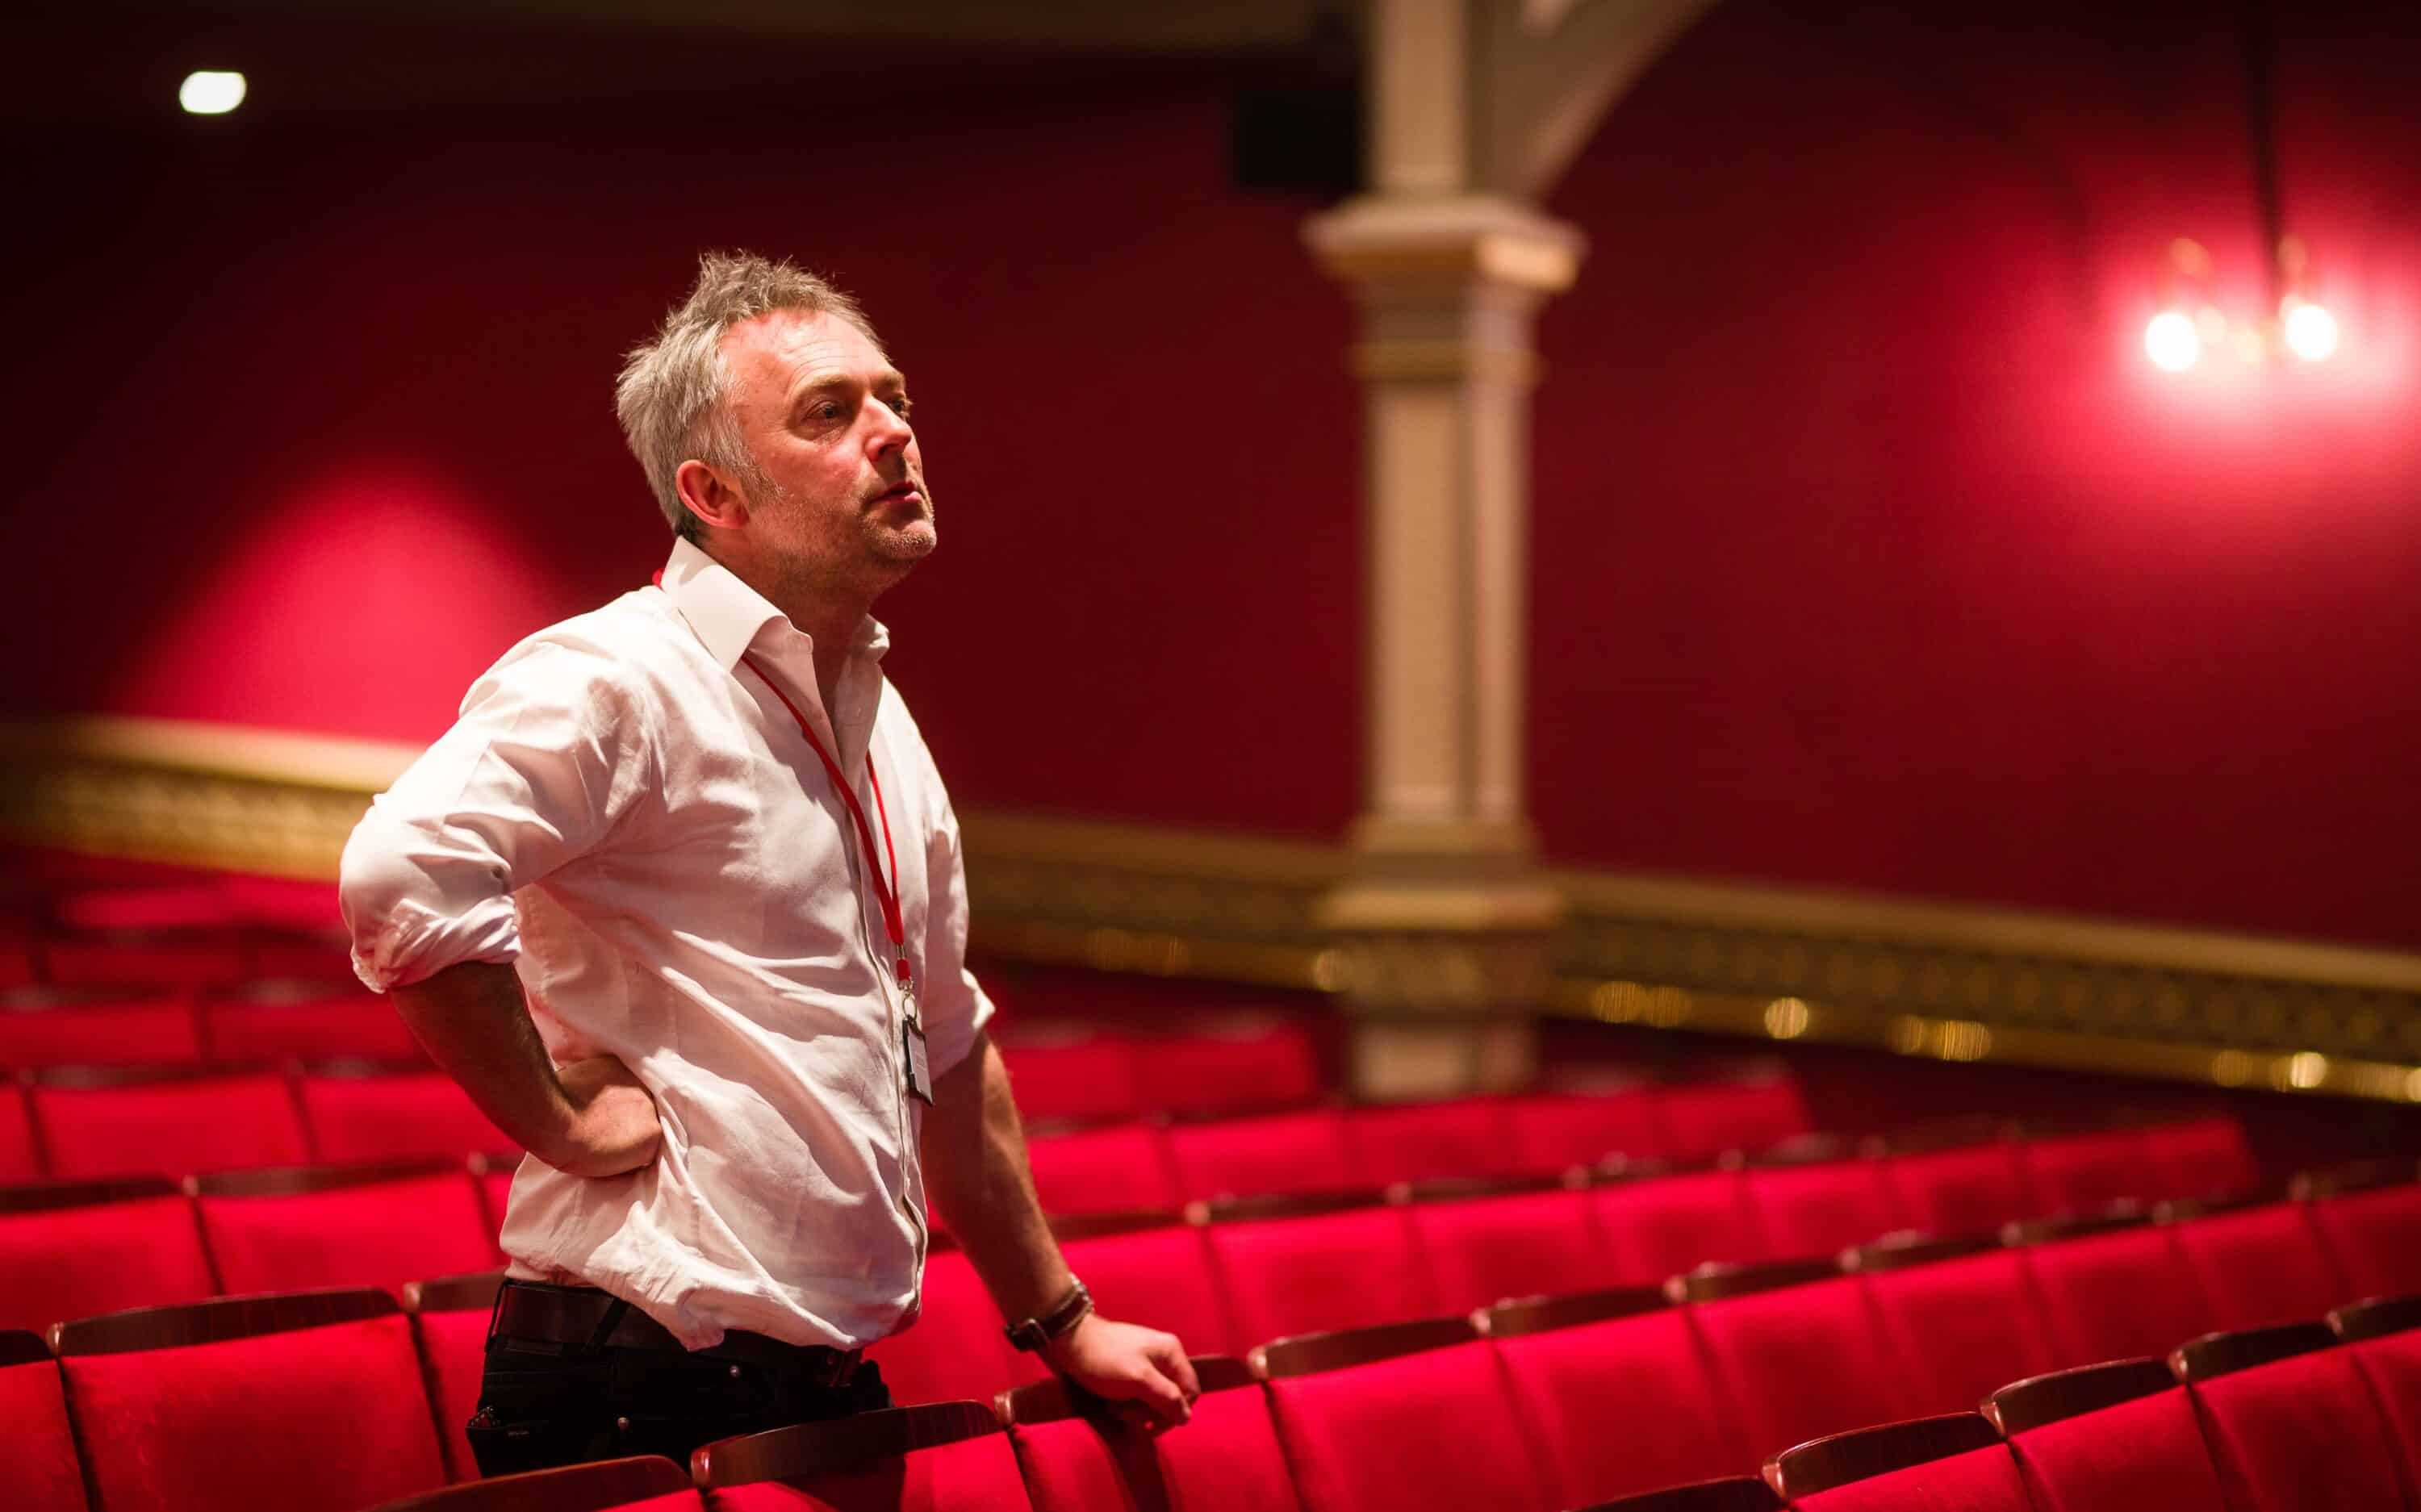 Featured image for Kneehigh's Ubu. Image features music director Charles Hazlewood standing in theatre amongst rows of red seats.